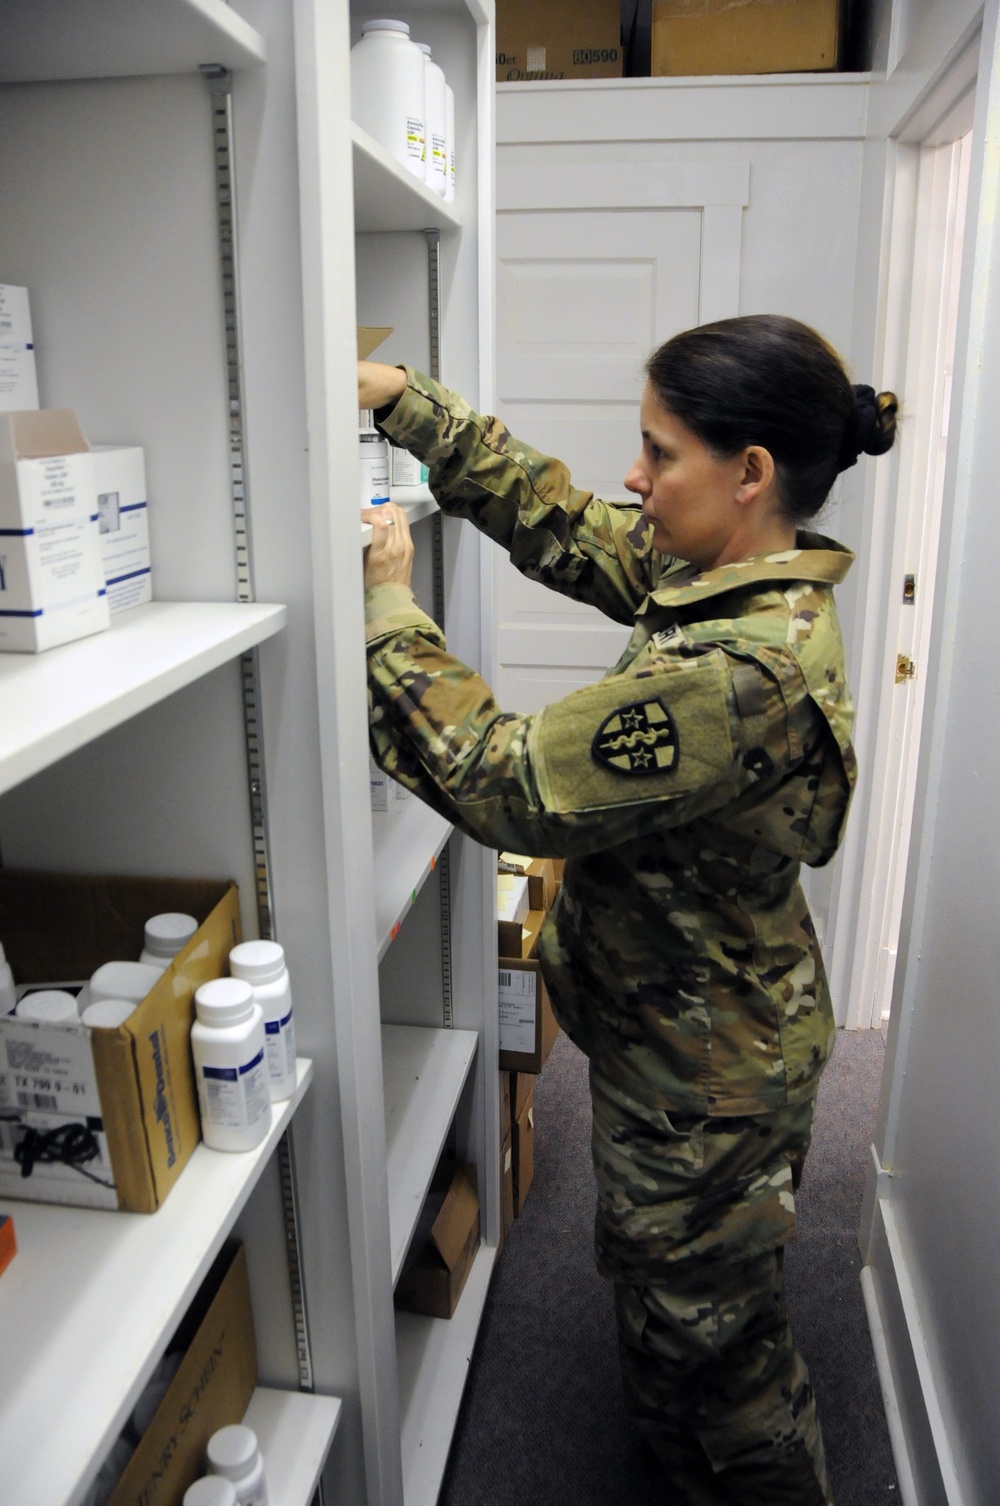 Army Reserve medical personnel improves readiness serving local communities